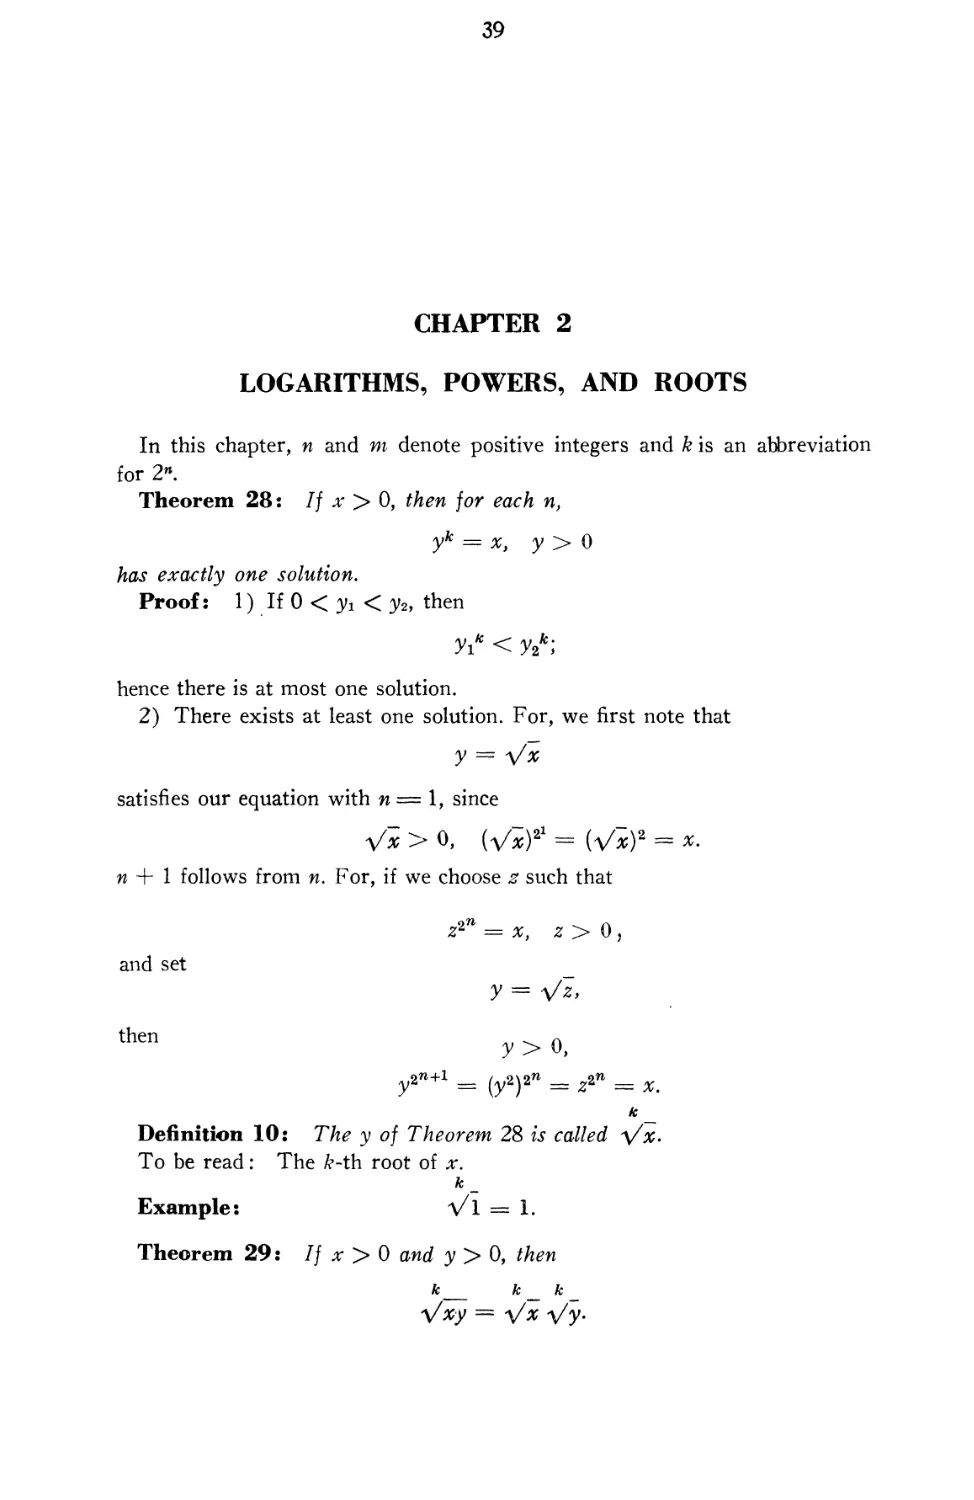 Chapter 2 Logarithms, Powers, and Roots